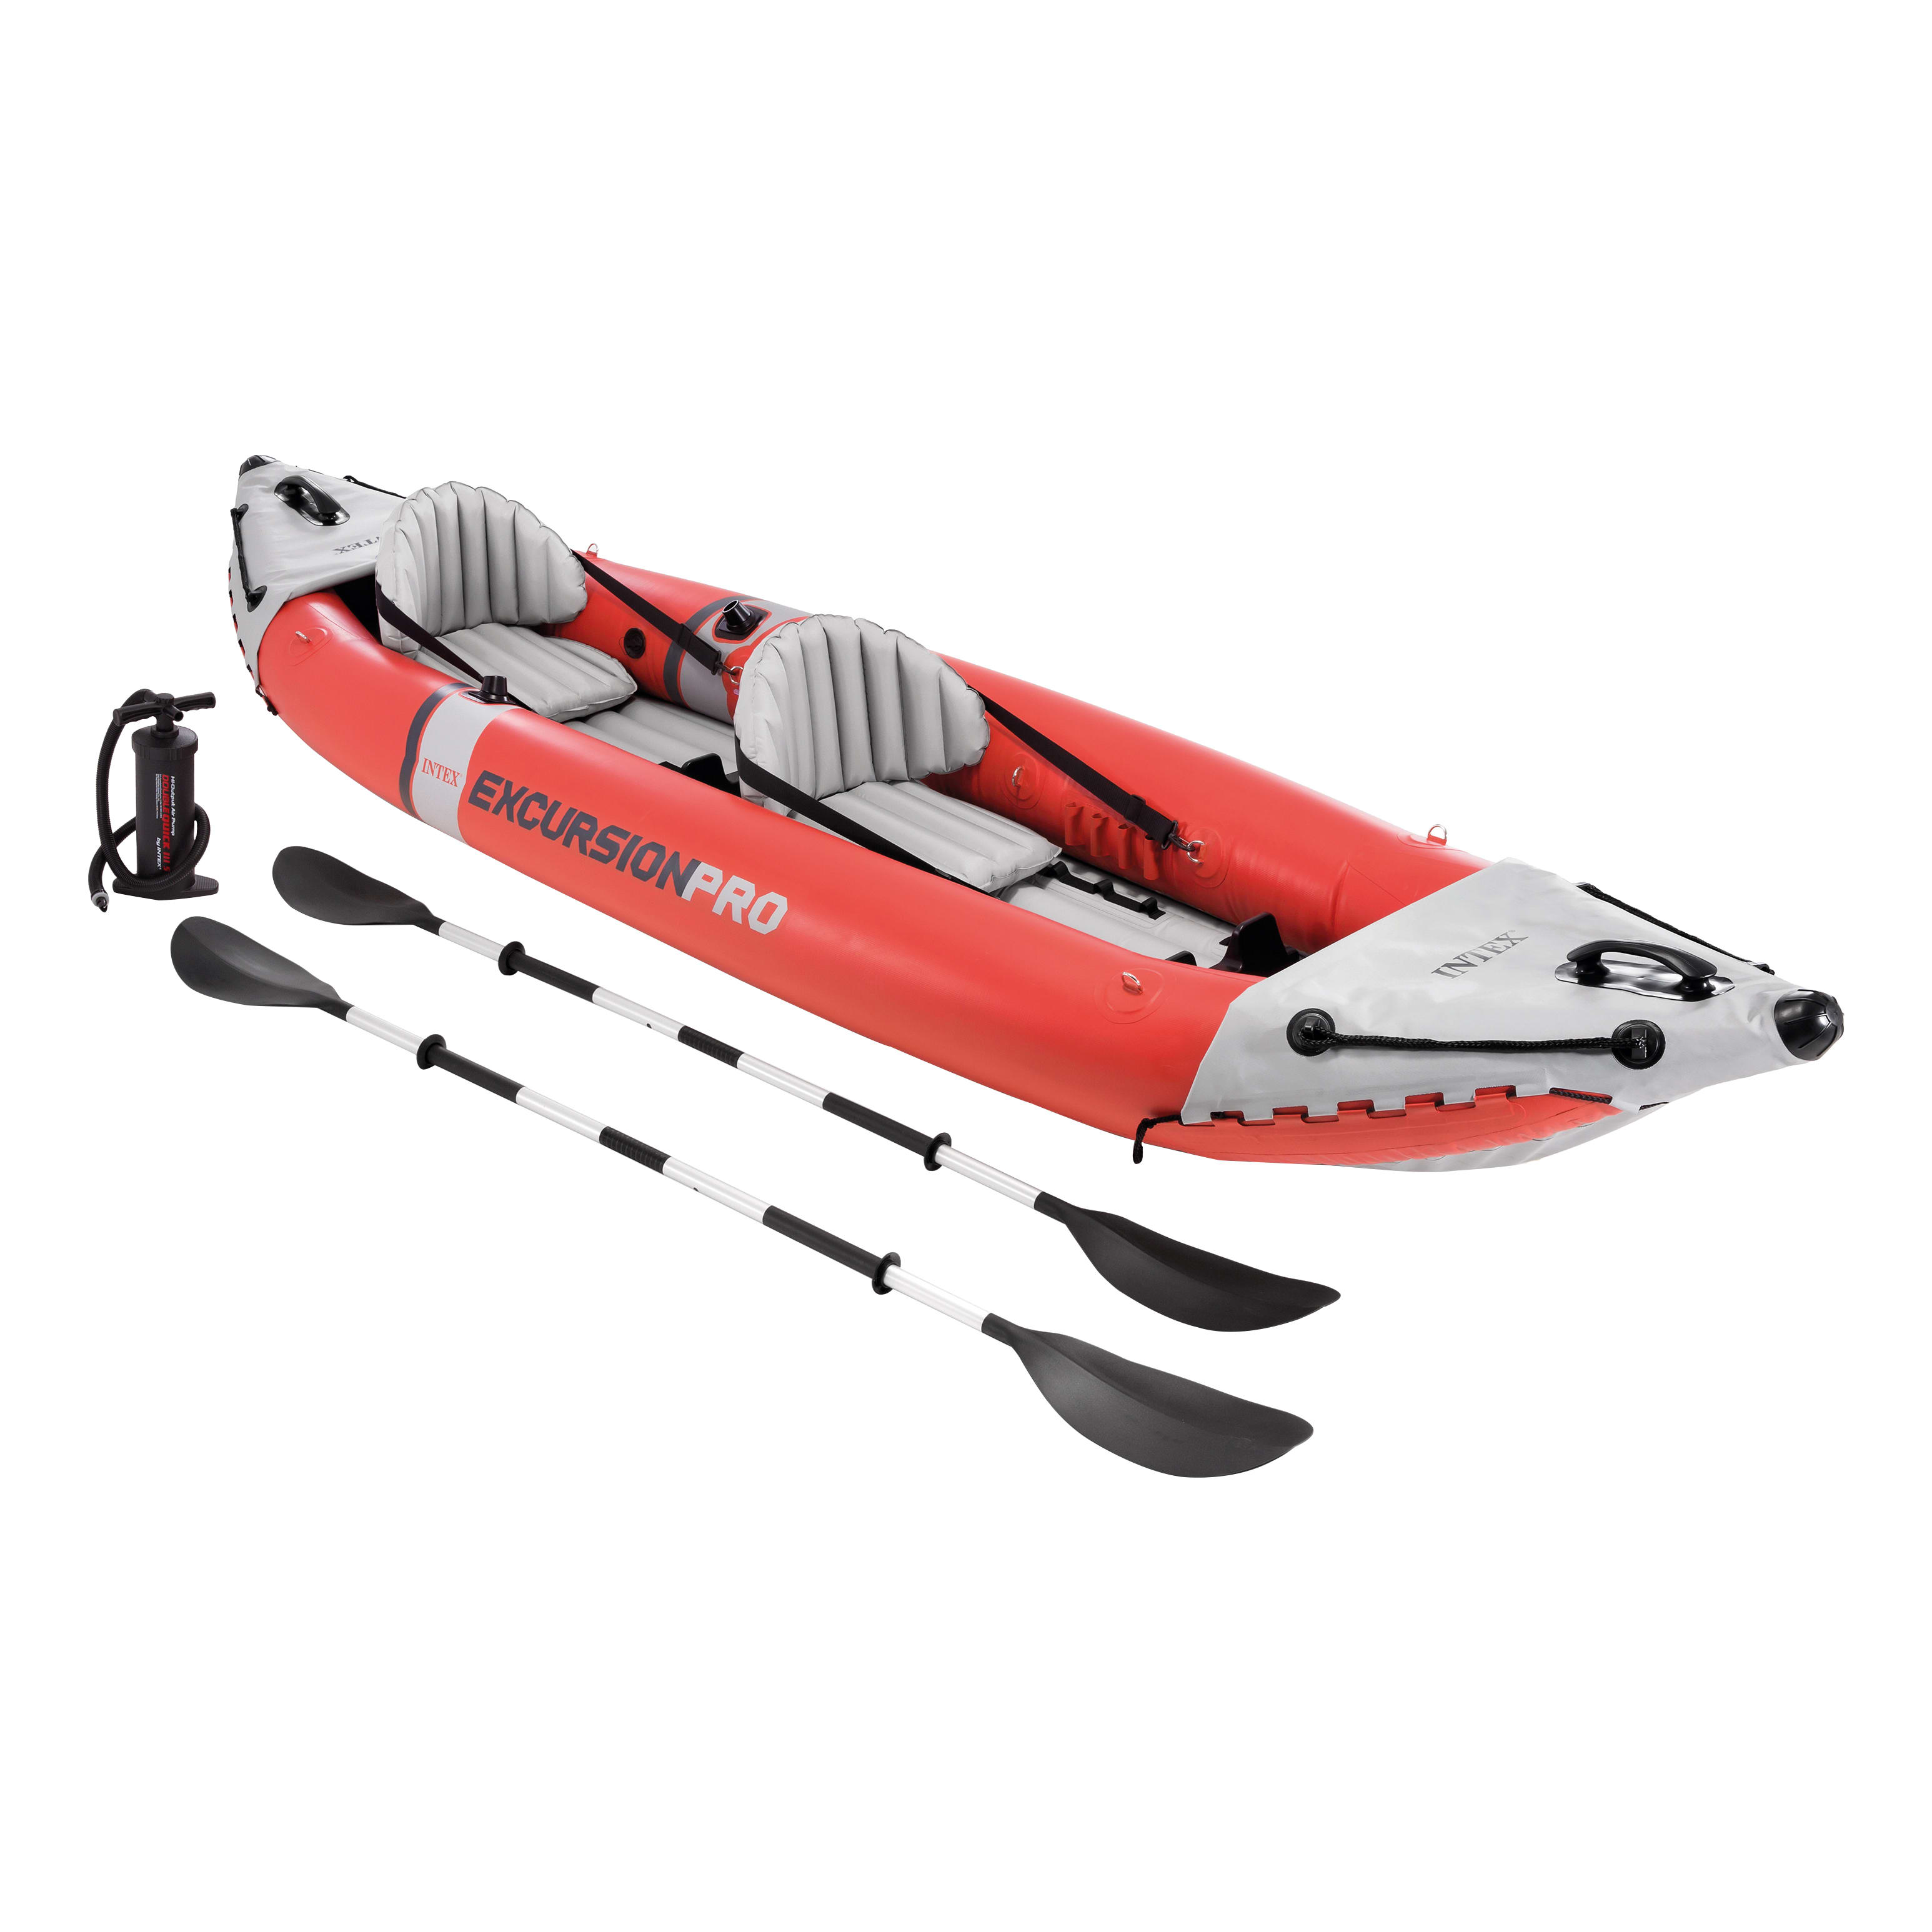 Intex Excursion 12.5-ft x 18-in Red 2-Person Polymer Inflatable Kayak L68309